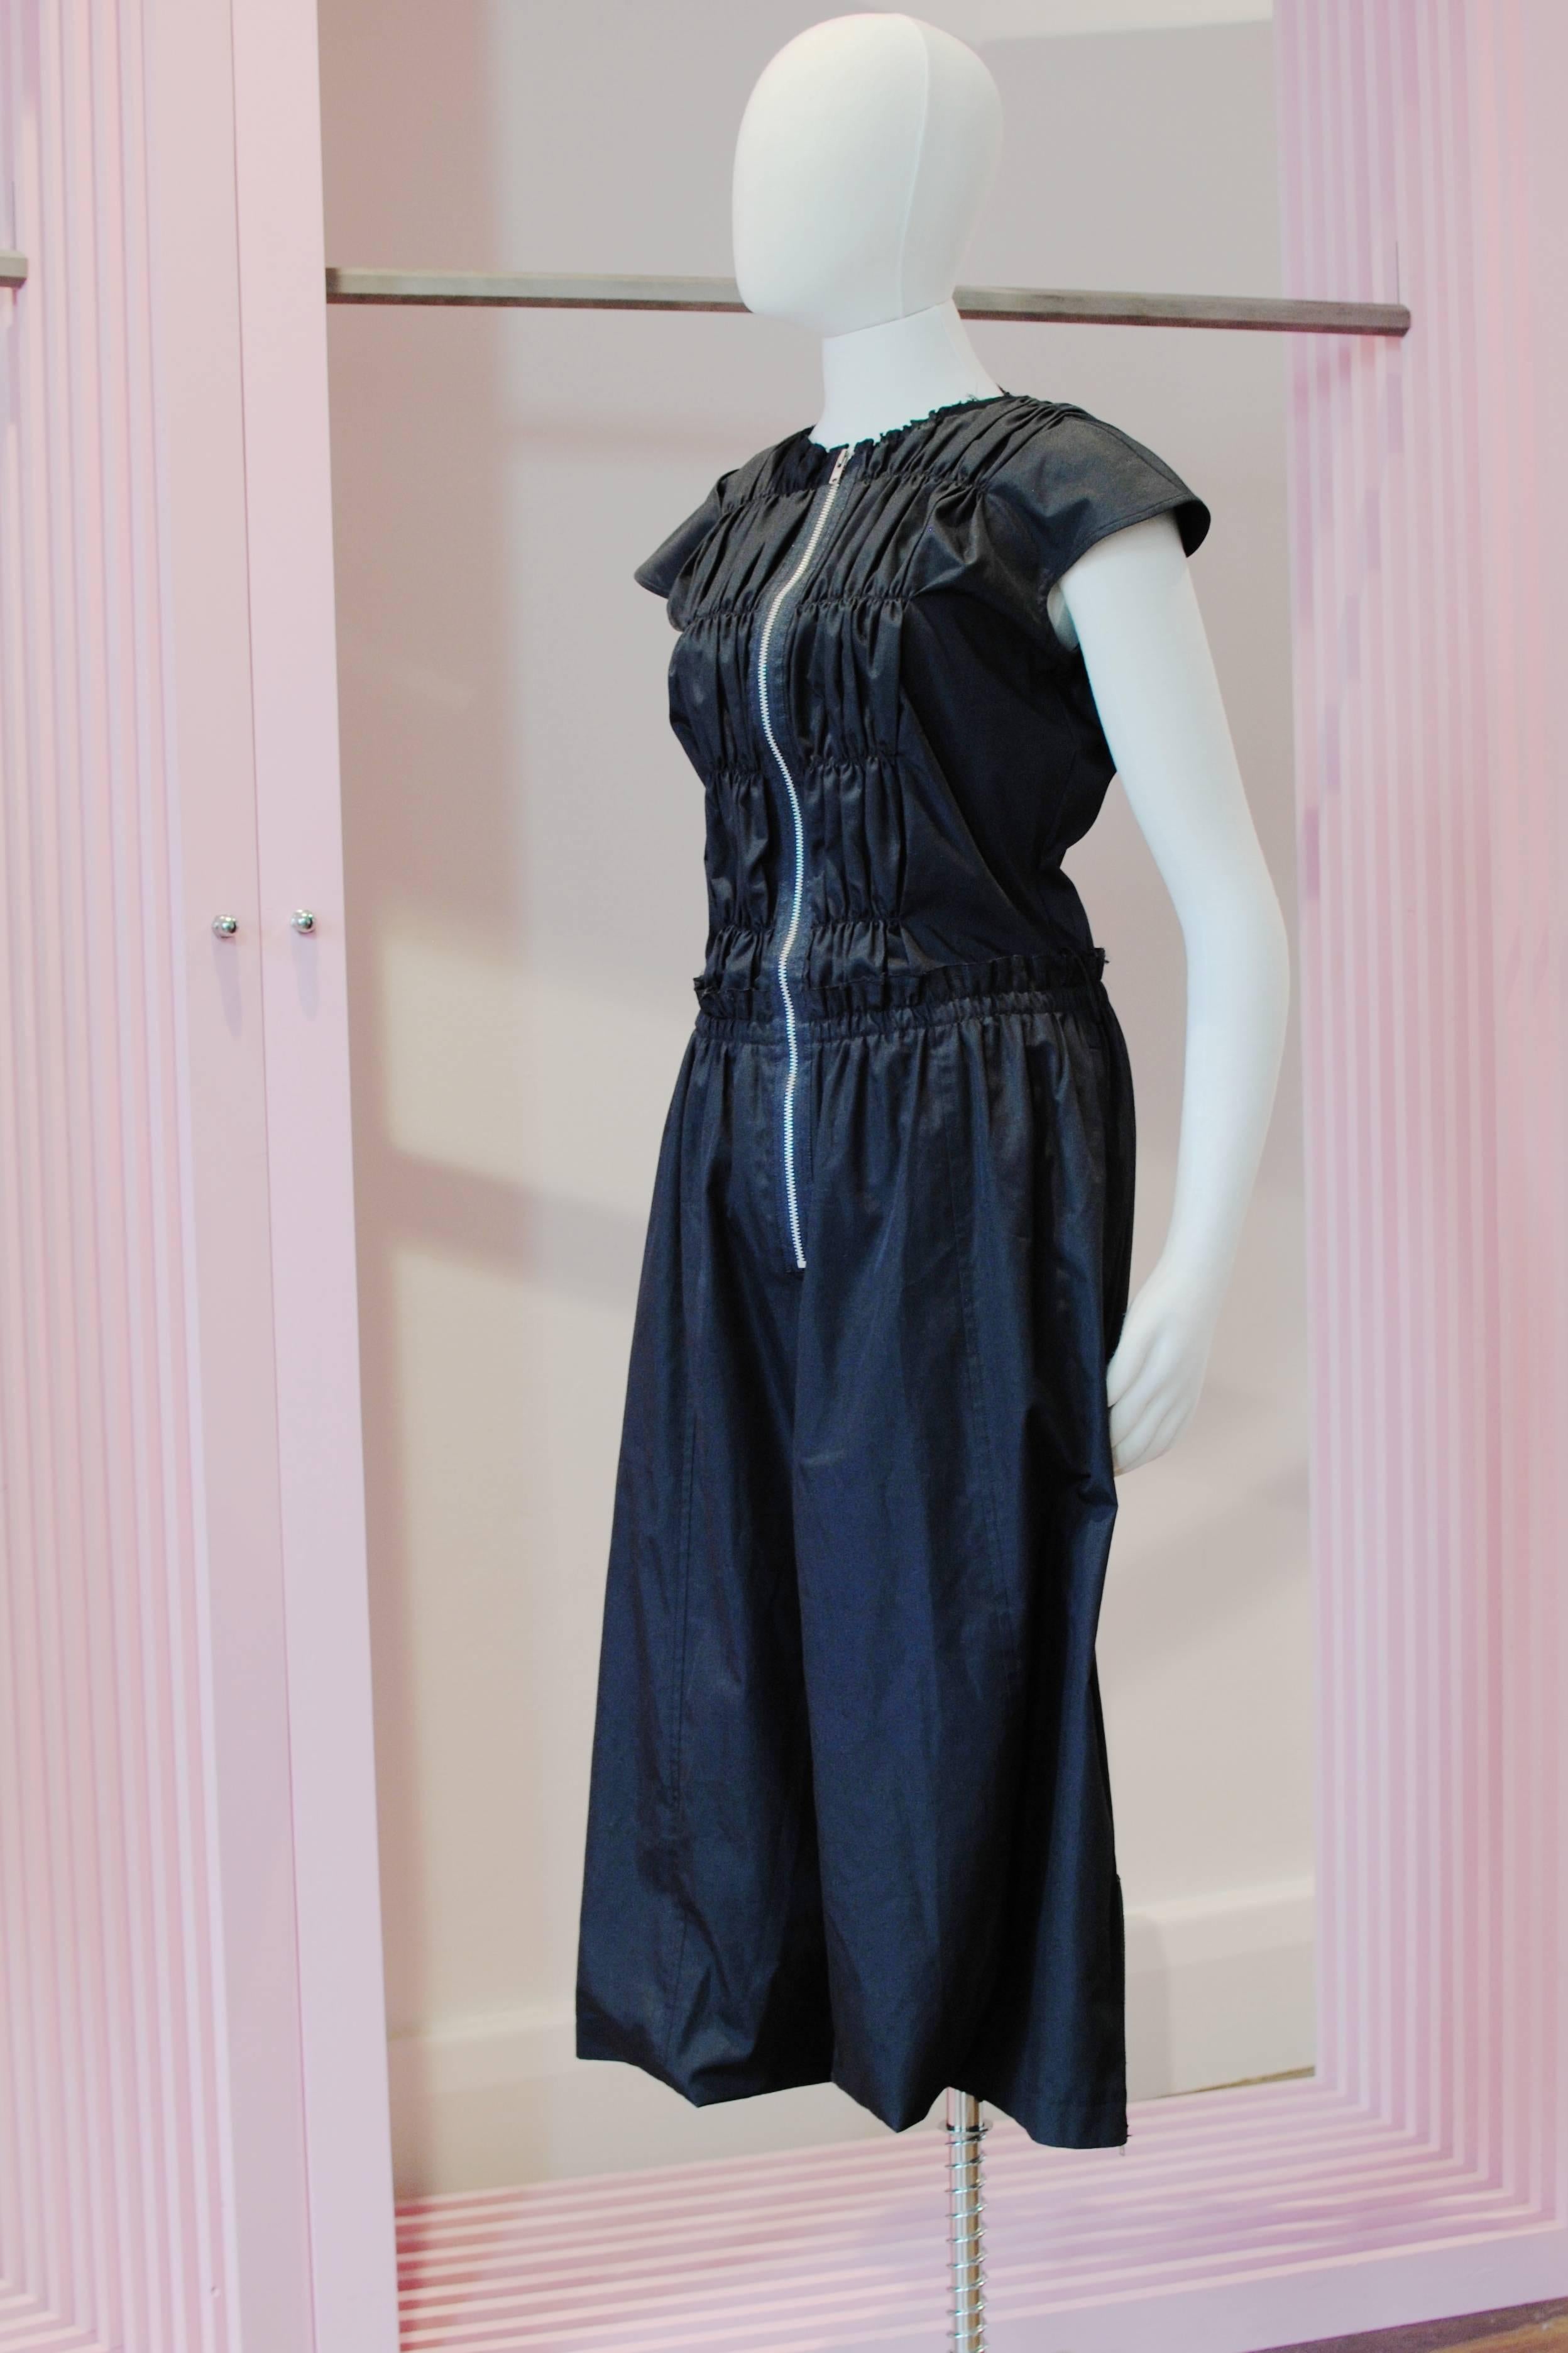 COMME des GARÇONS black samurai jumpsuit from the 2002 Spring/Summer collection. It features a ruched chest and back, front zip fastening, cap sleeves, two waist pockets, belt loops and two slits at the base for the legs to go through with side